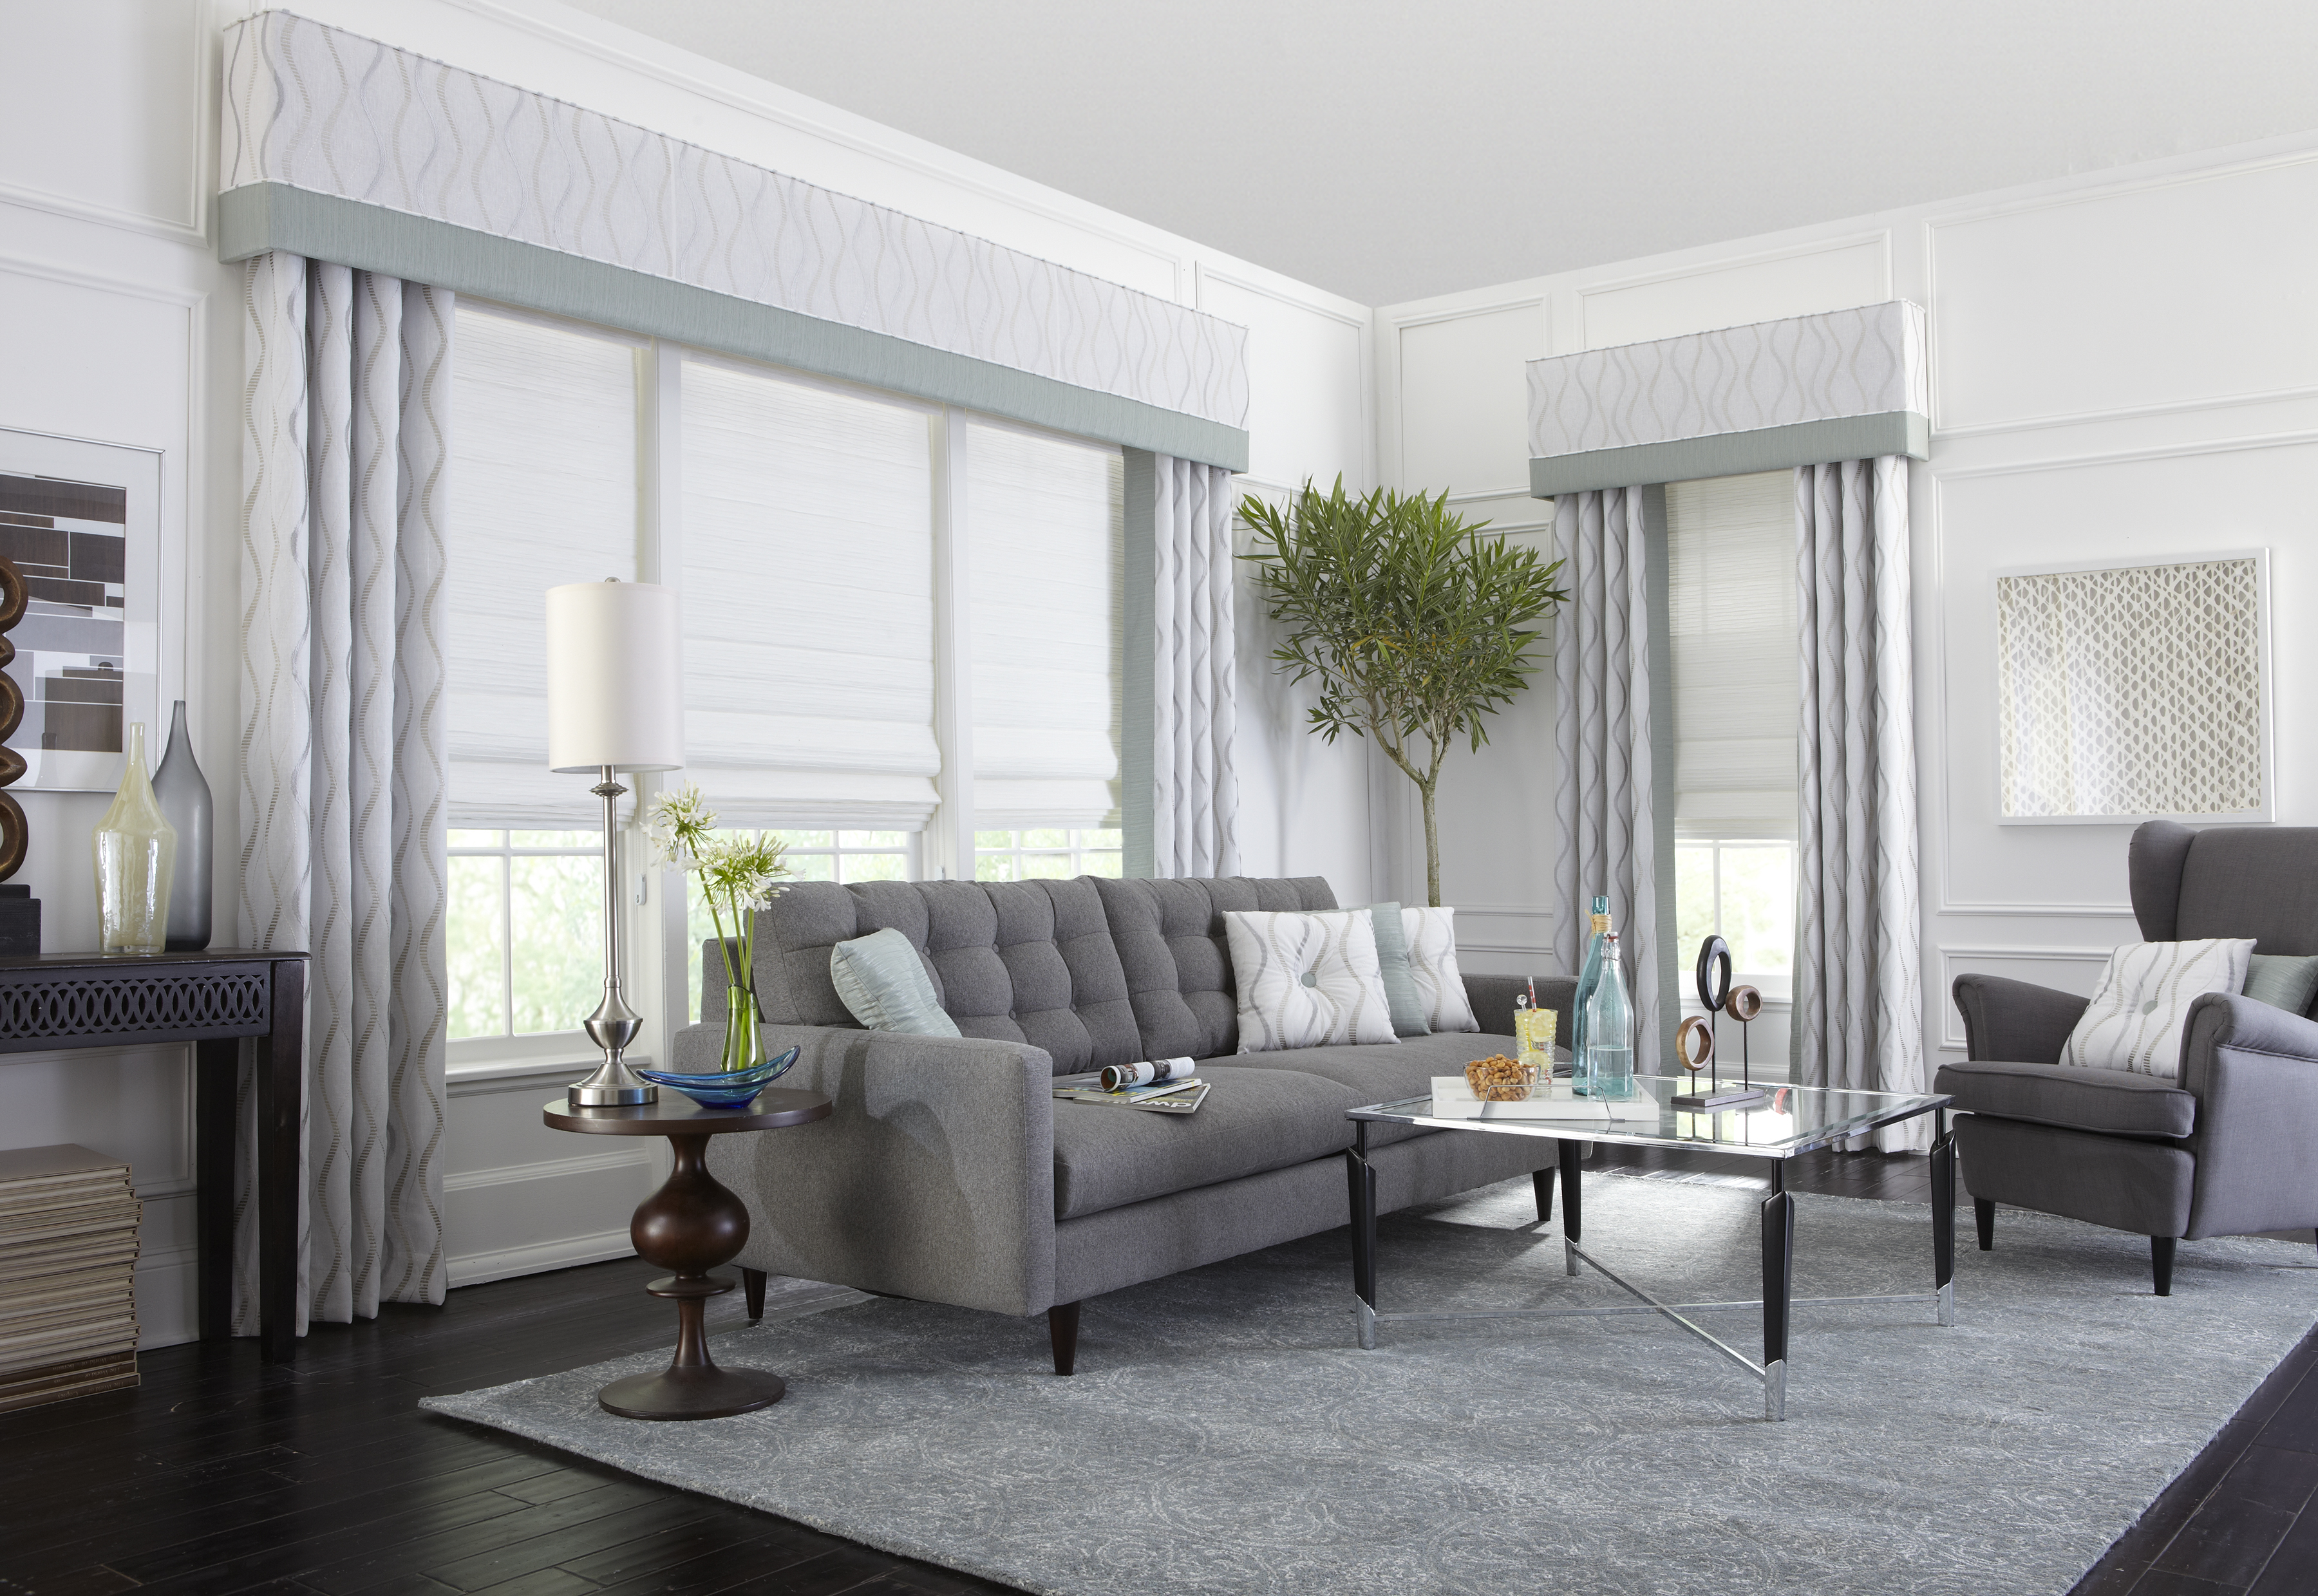 window treatments, blinds, shades, shutters, exterior shades, draperies, accent rugs, motorized blinds, 